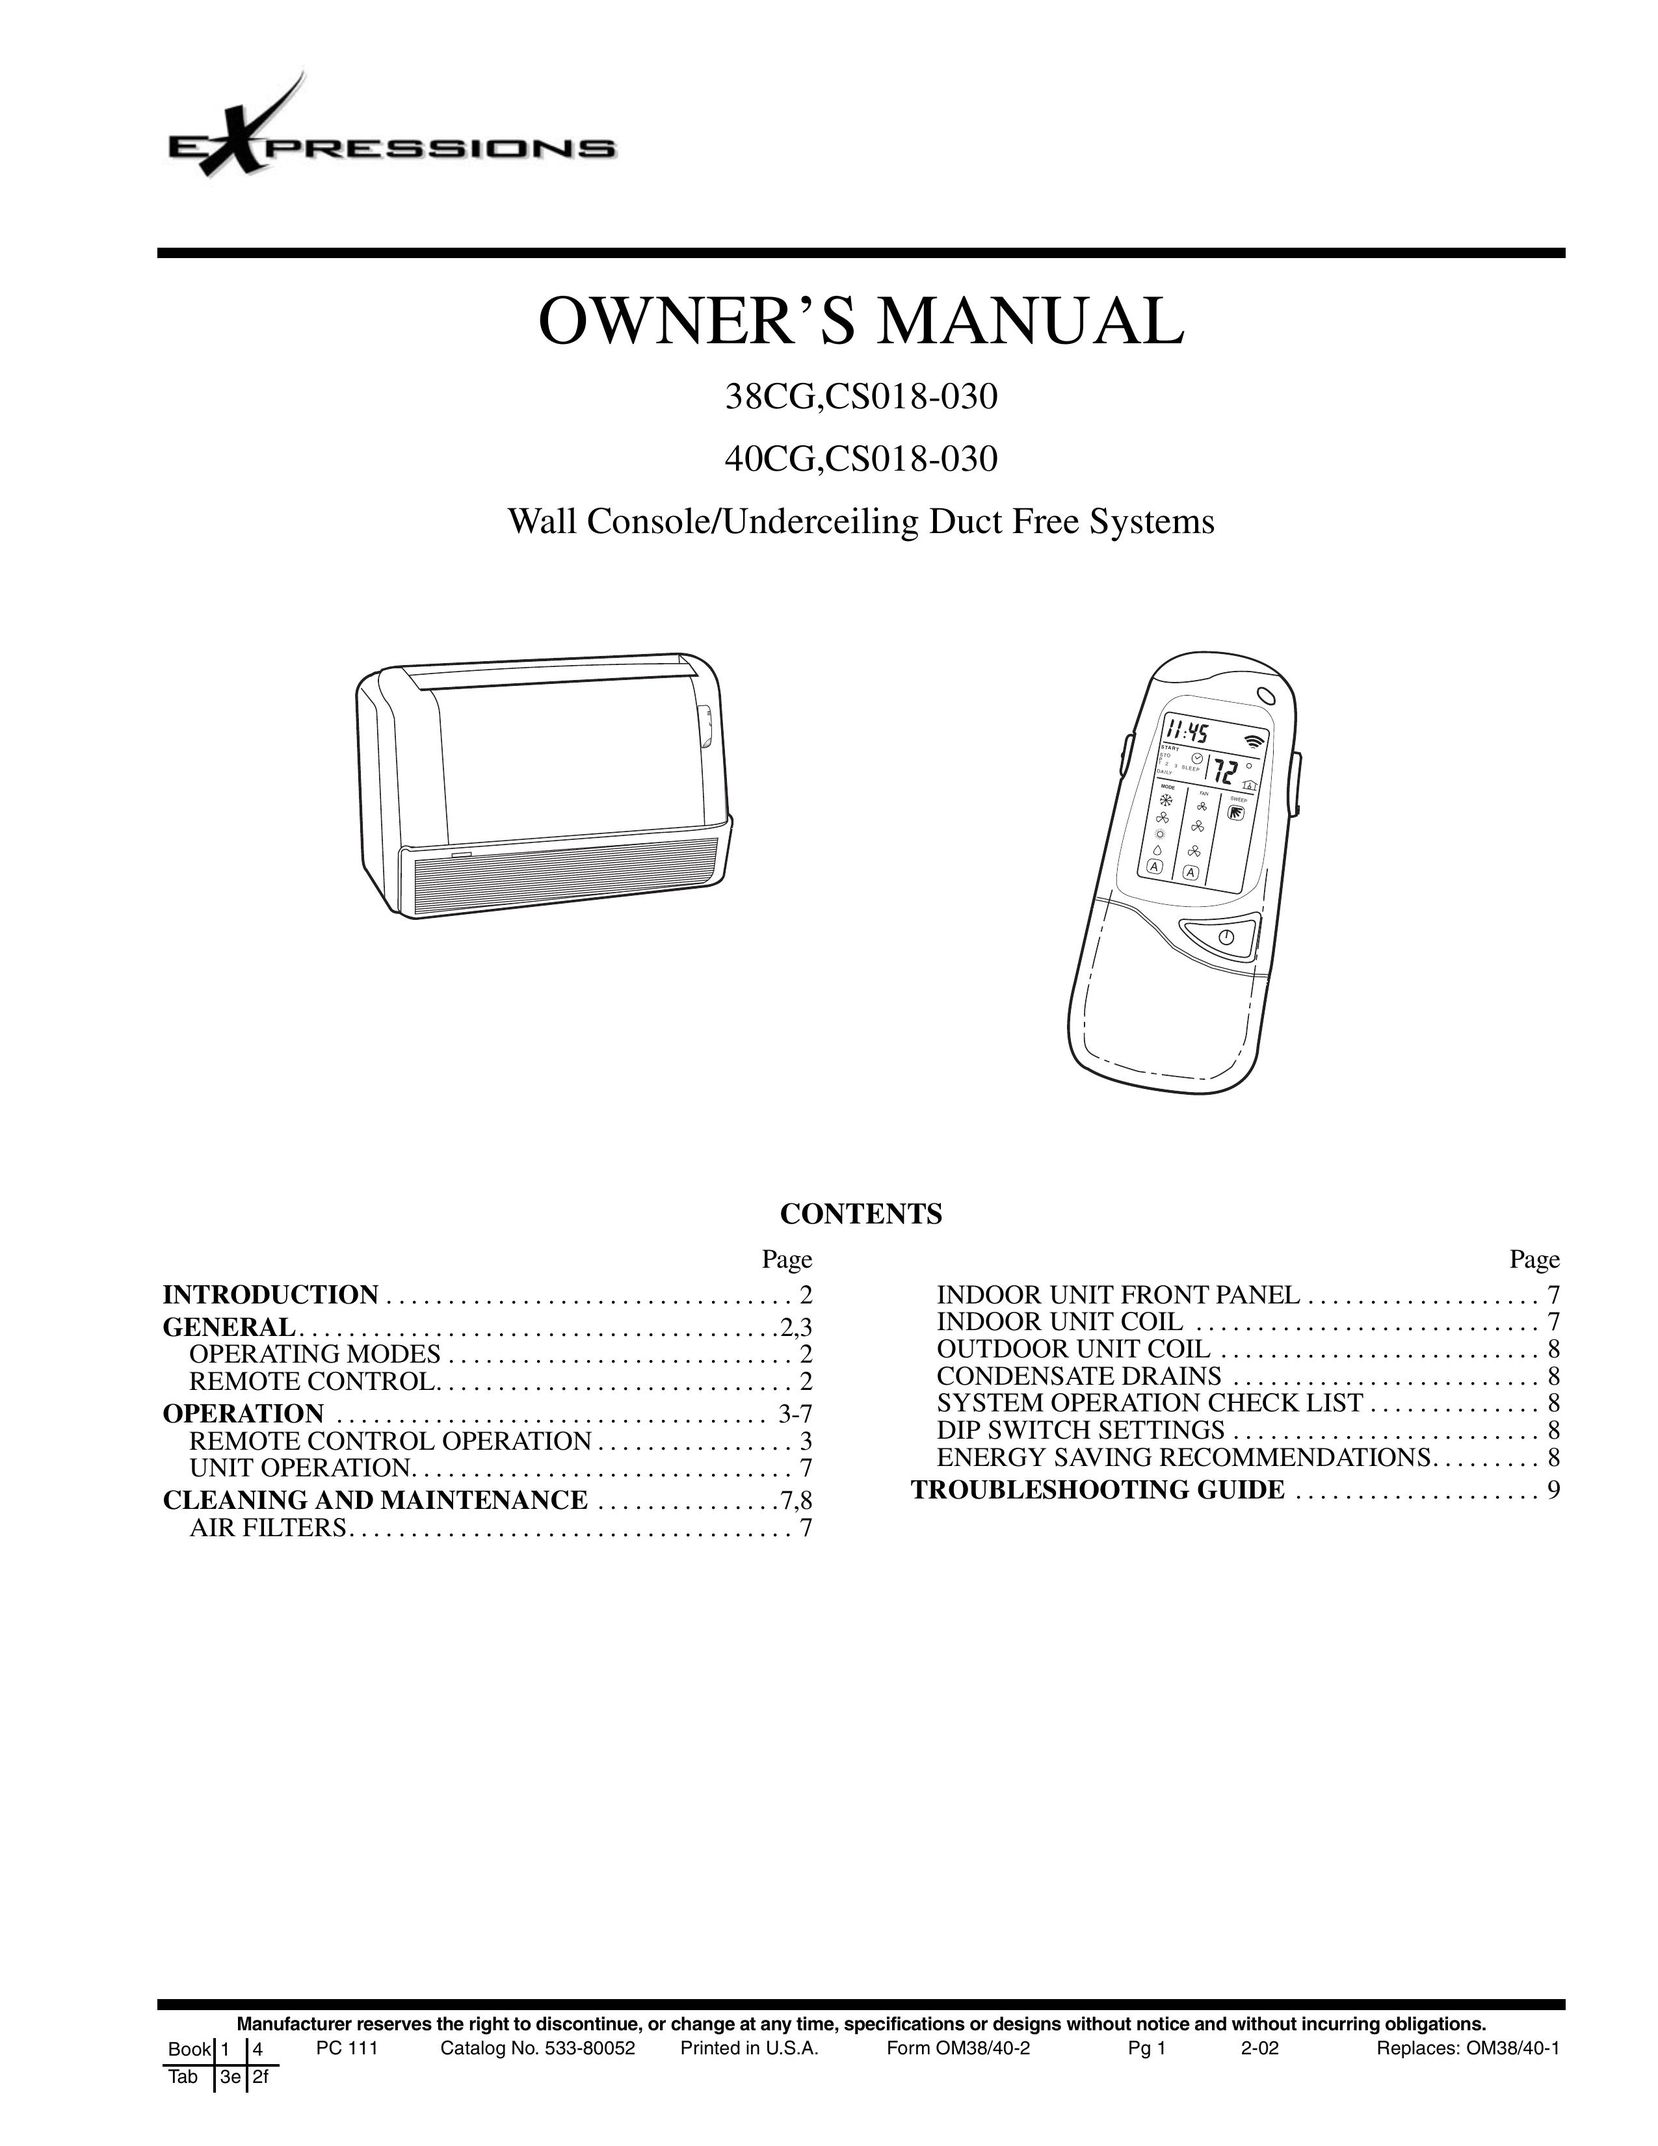 Computer Expressions 38CG Air Conditioner User Manual